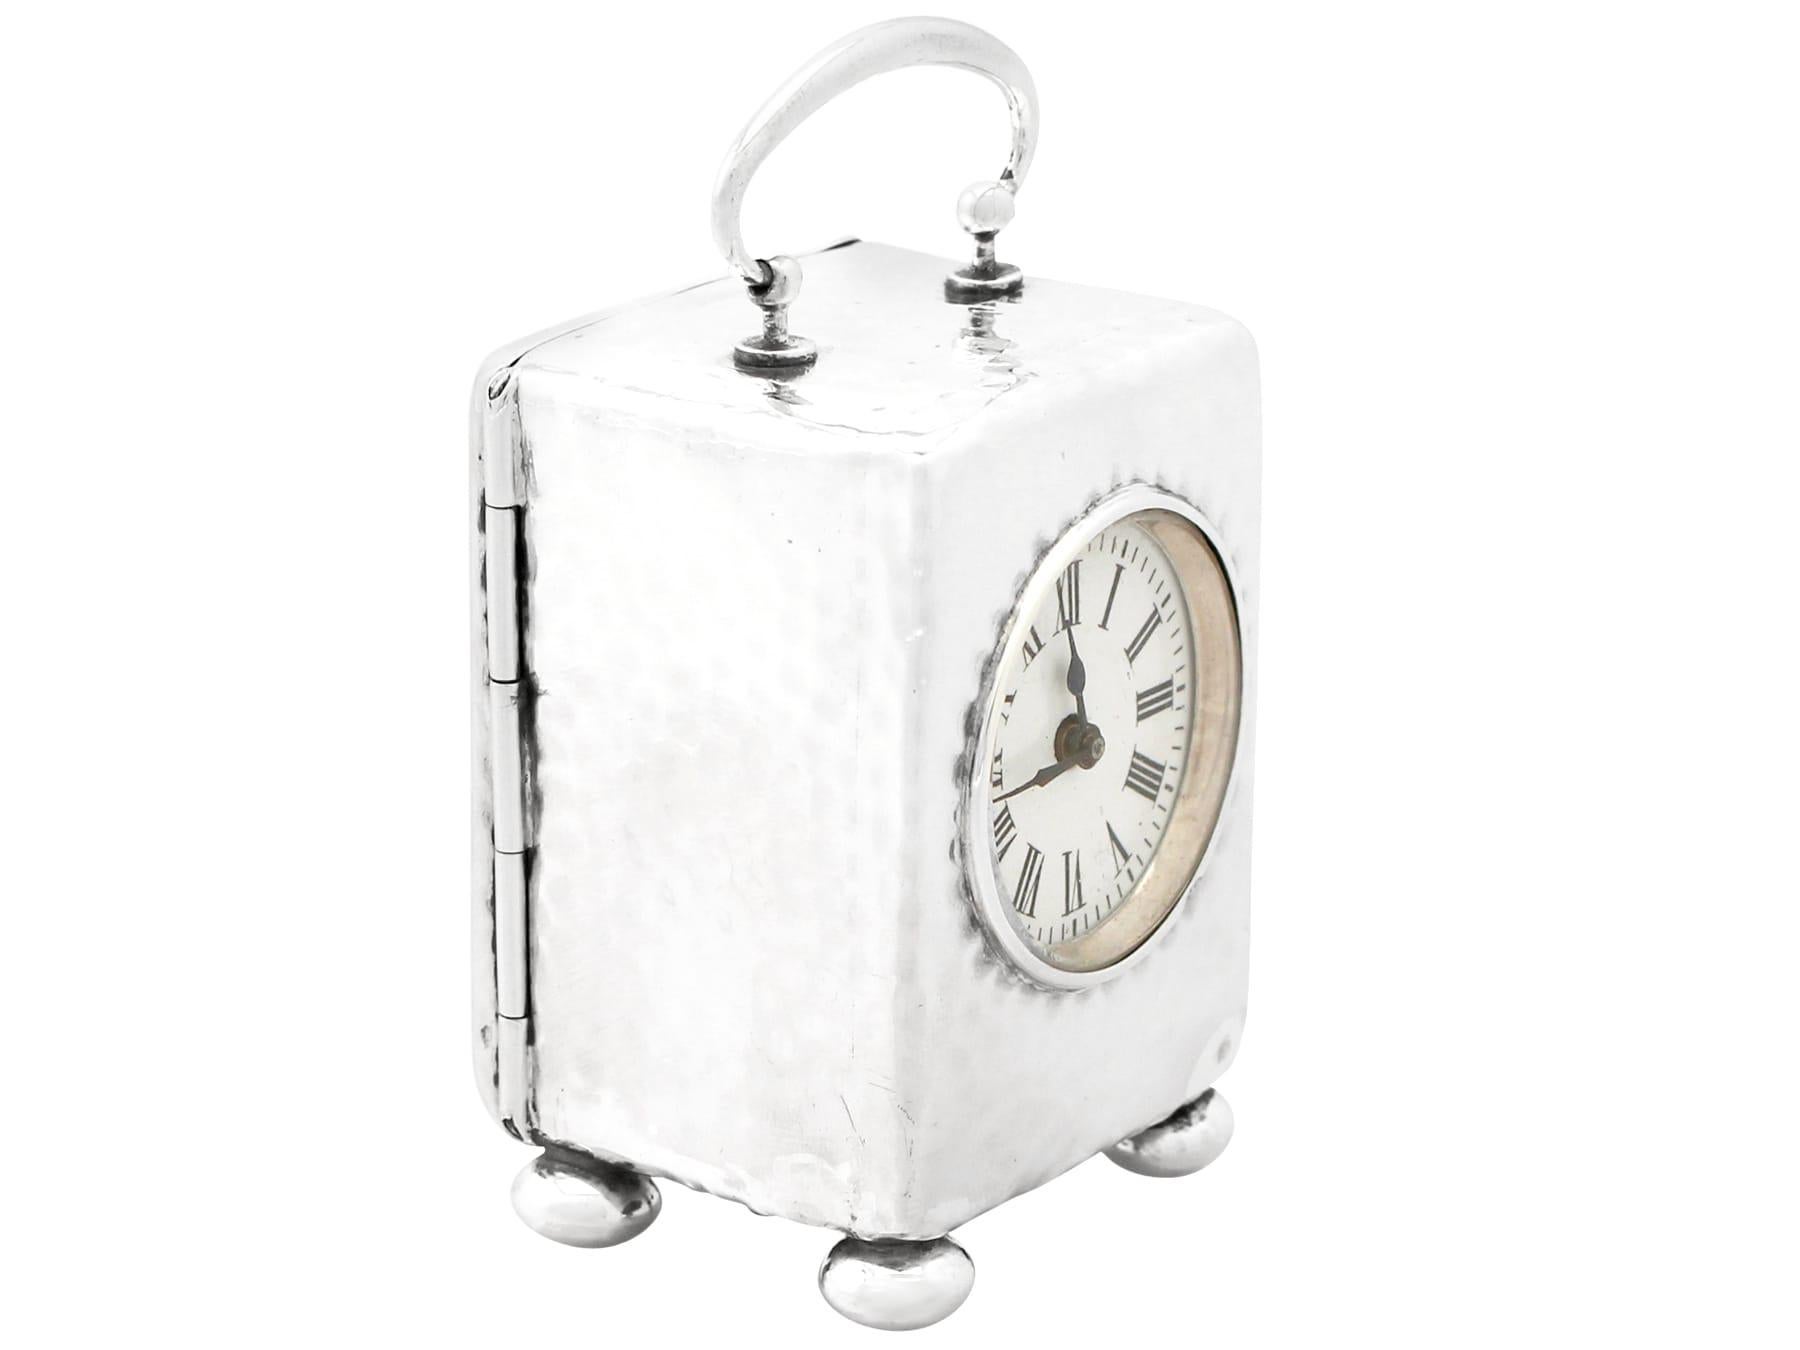 A fine and impressive antique Victorian English sterling silver eight-day boudoir clock; an addition to our silver timepiece collection.

This fine antique Victorian sterling silver boudoir clock has a plain rectangular form onto four bun